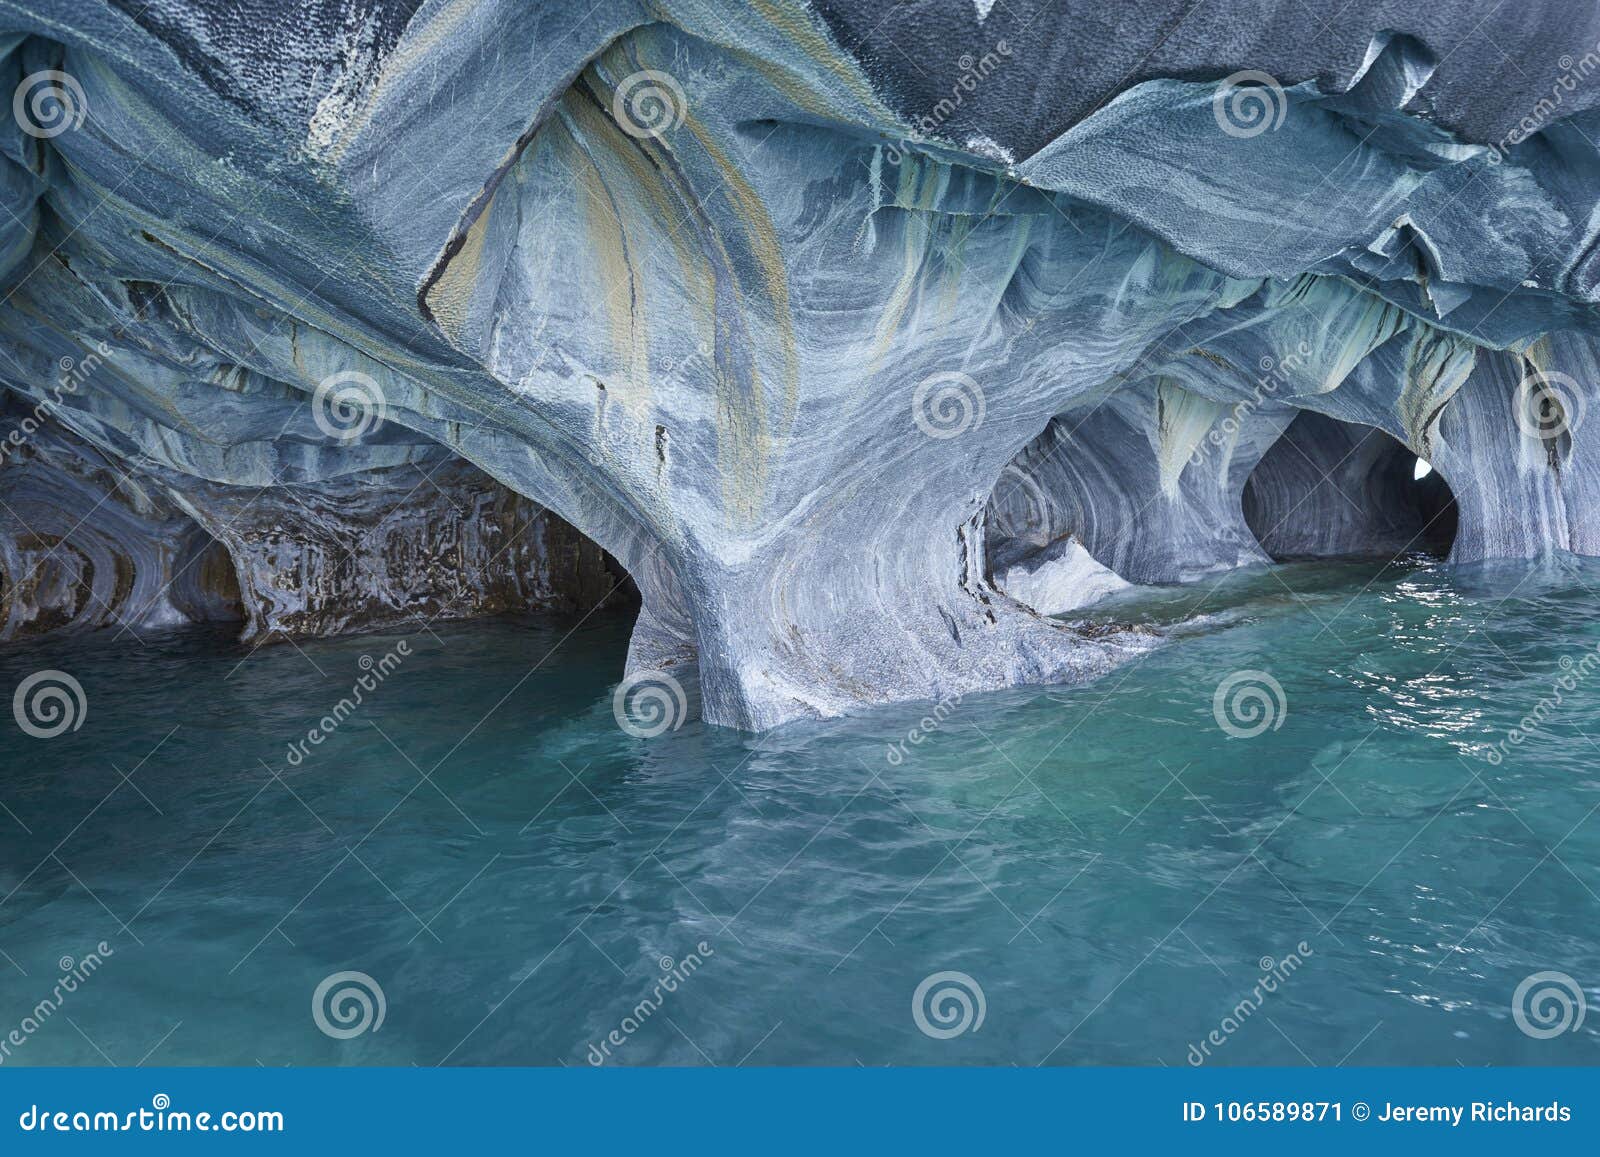 marble caves in northern patagonia, chile.